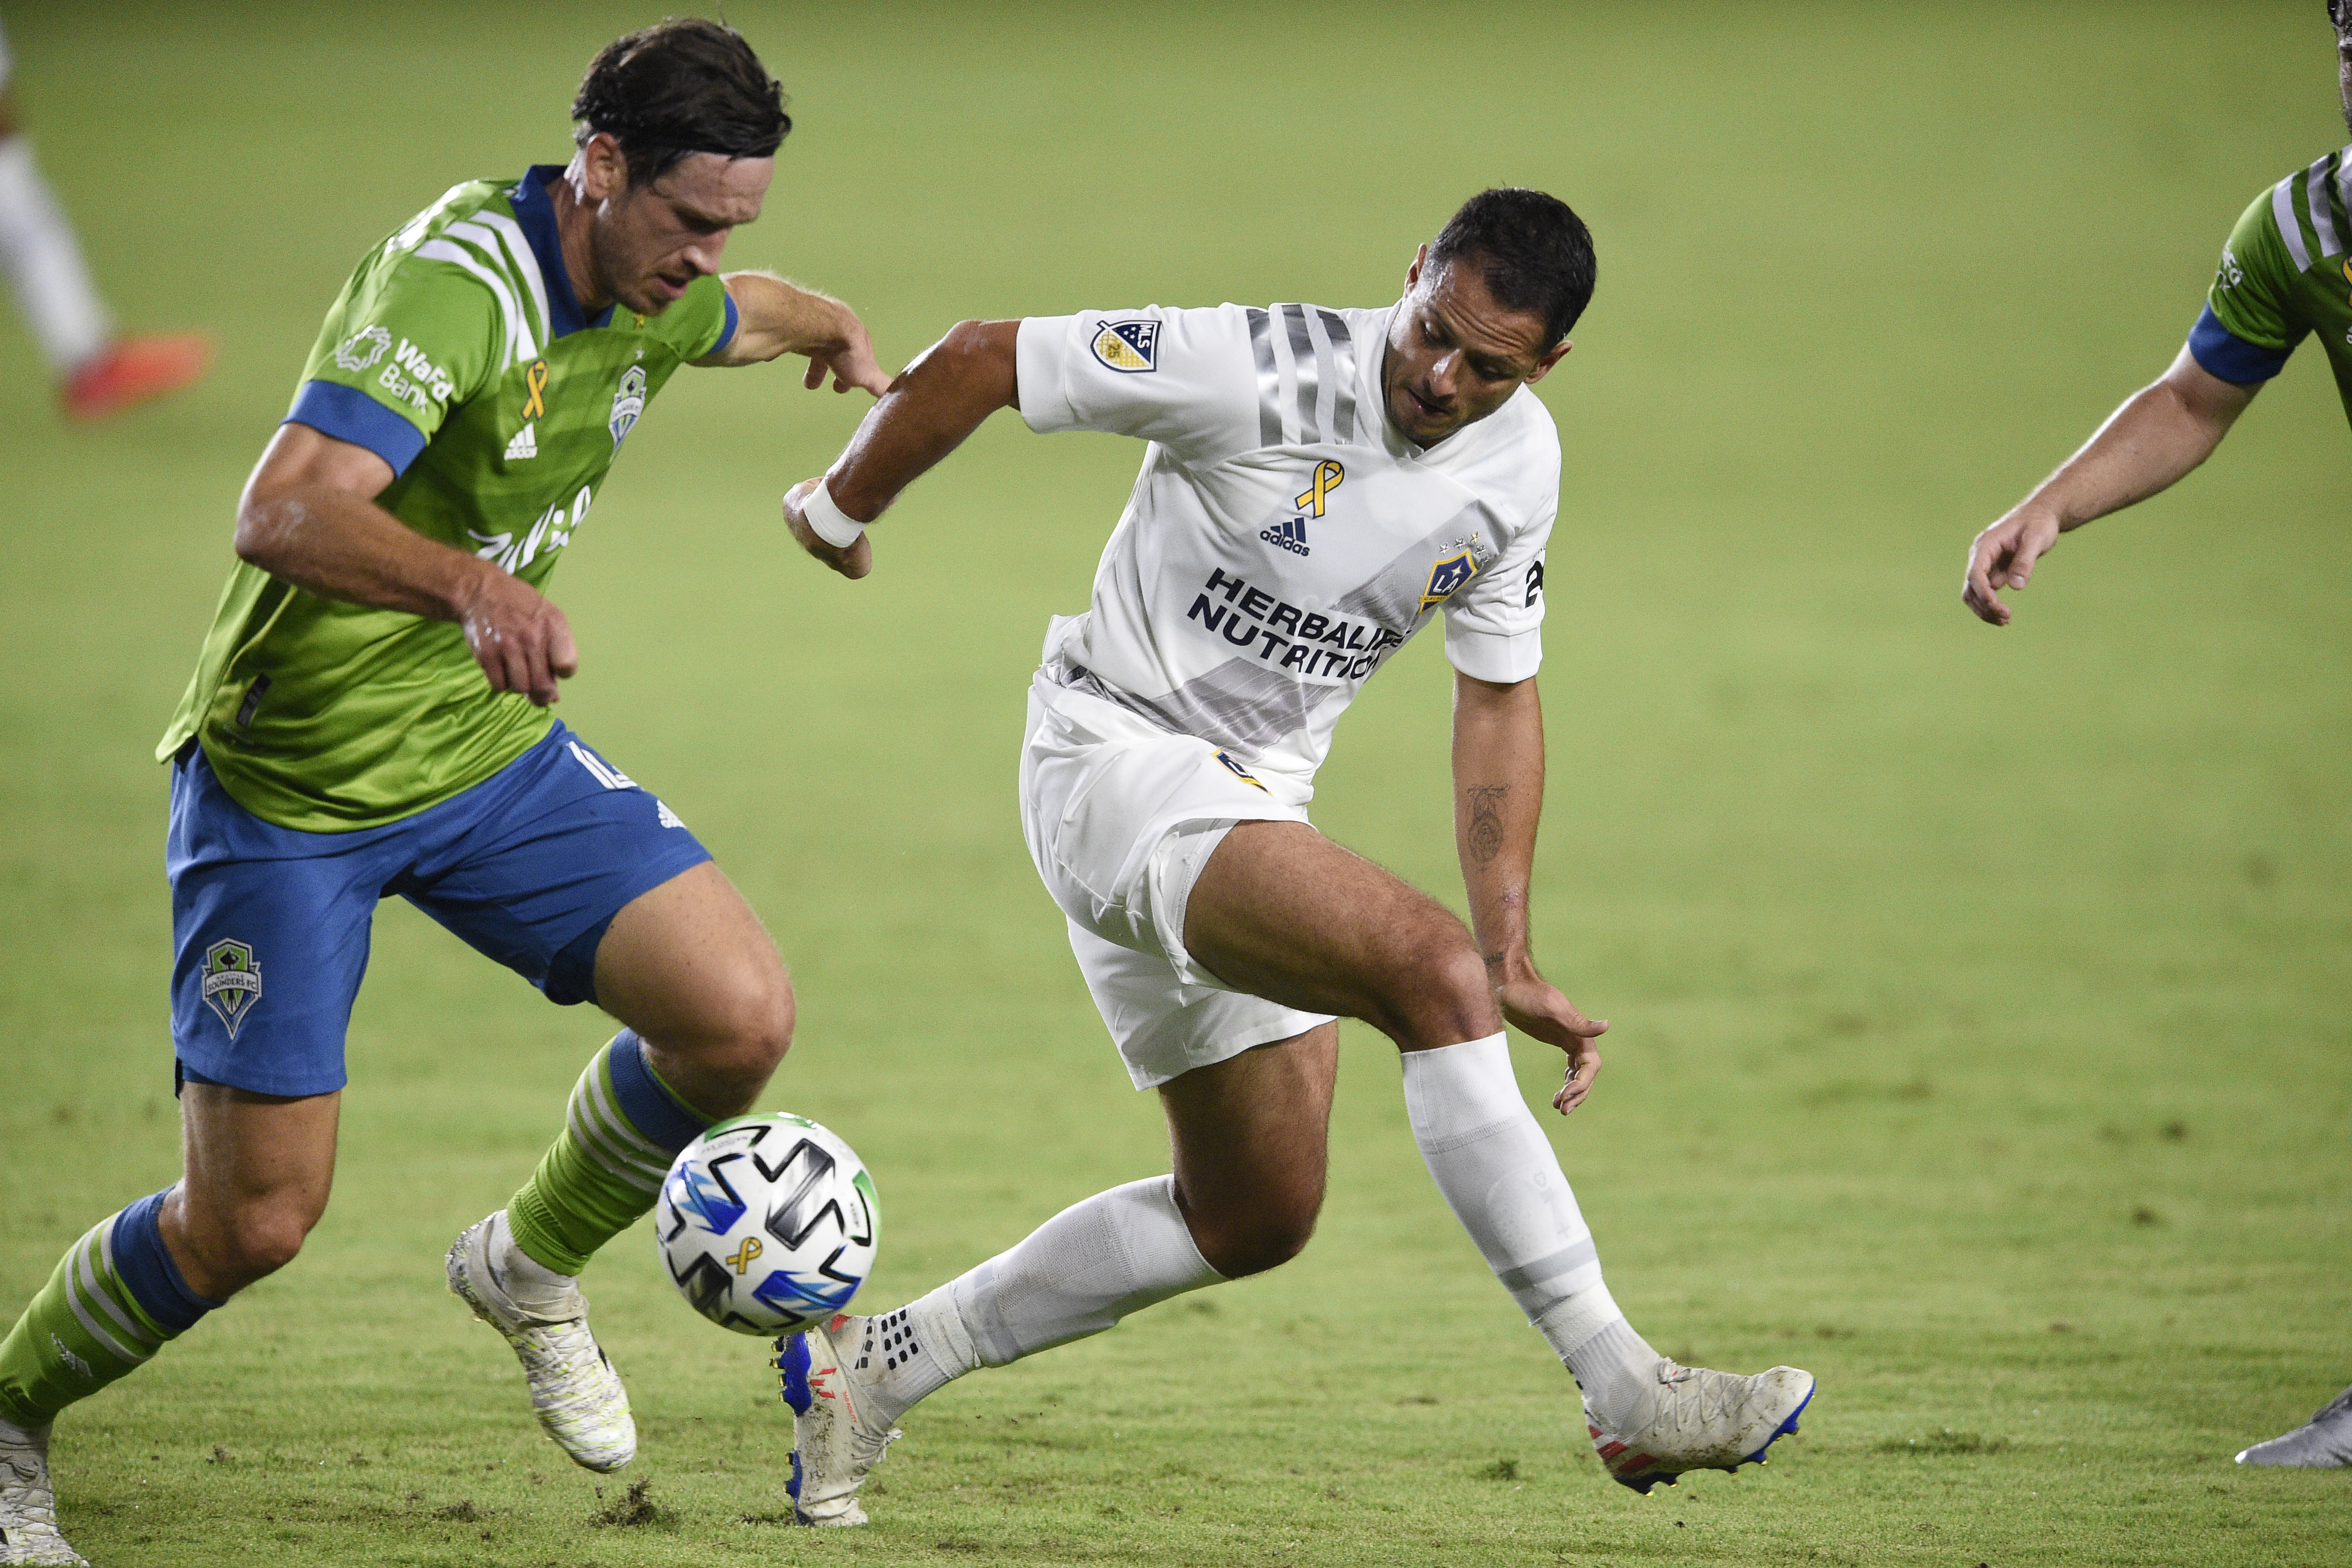 Sep 27, 2020; Carson, California, USA; Seattle Sounders midfielder Gustav Svensson (4) and LA Galaxy forward Javier Hernández (14) battle for the ball during the first half at Dignity Health Sports Park. Mandatory Credit: Kelvin Kuo-USA TODAY Sports